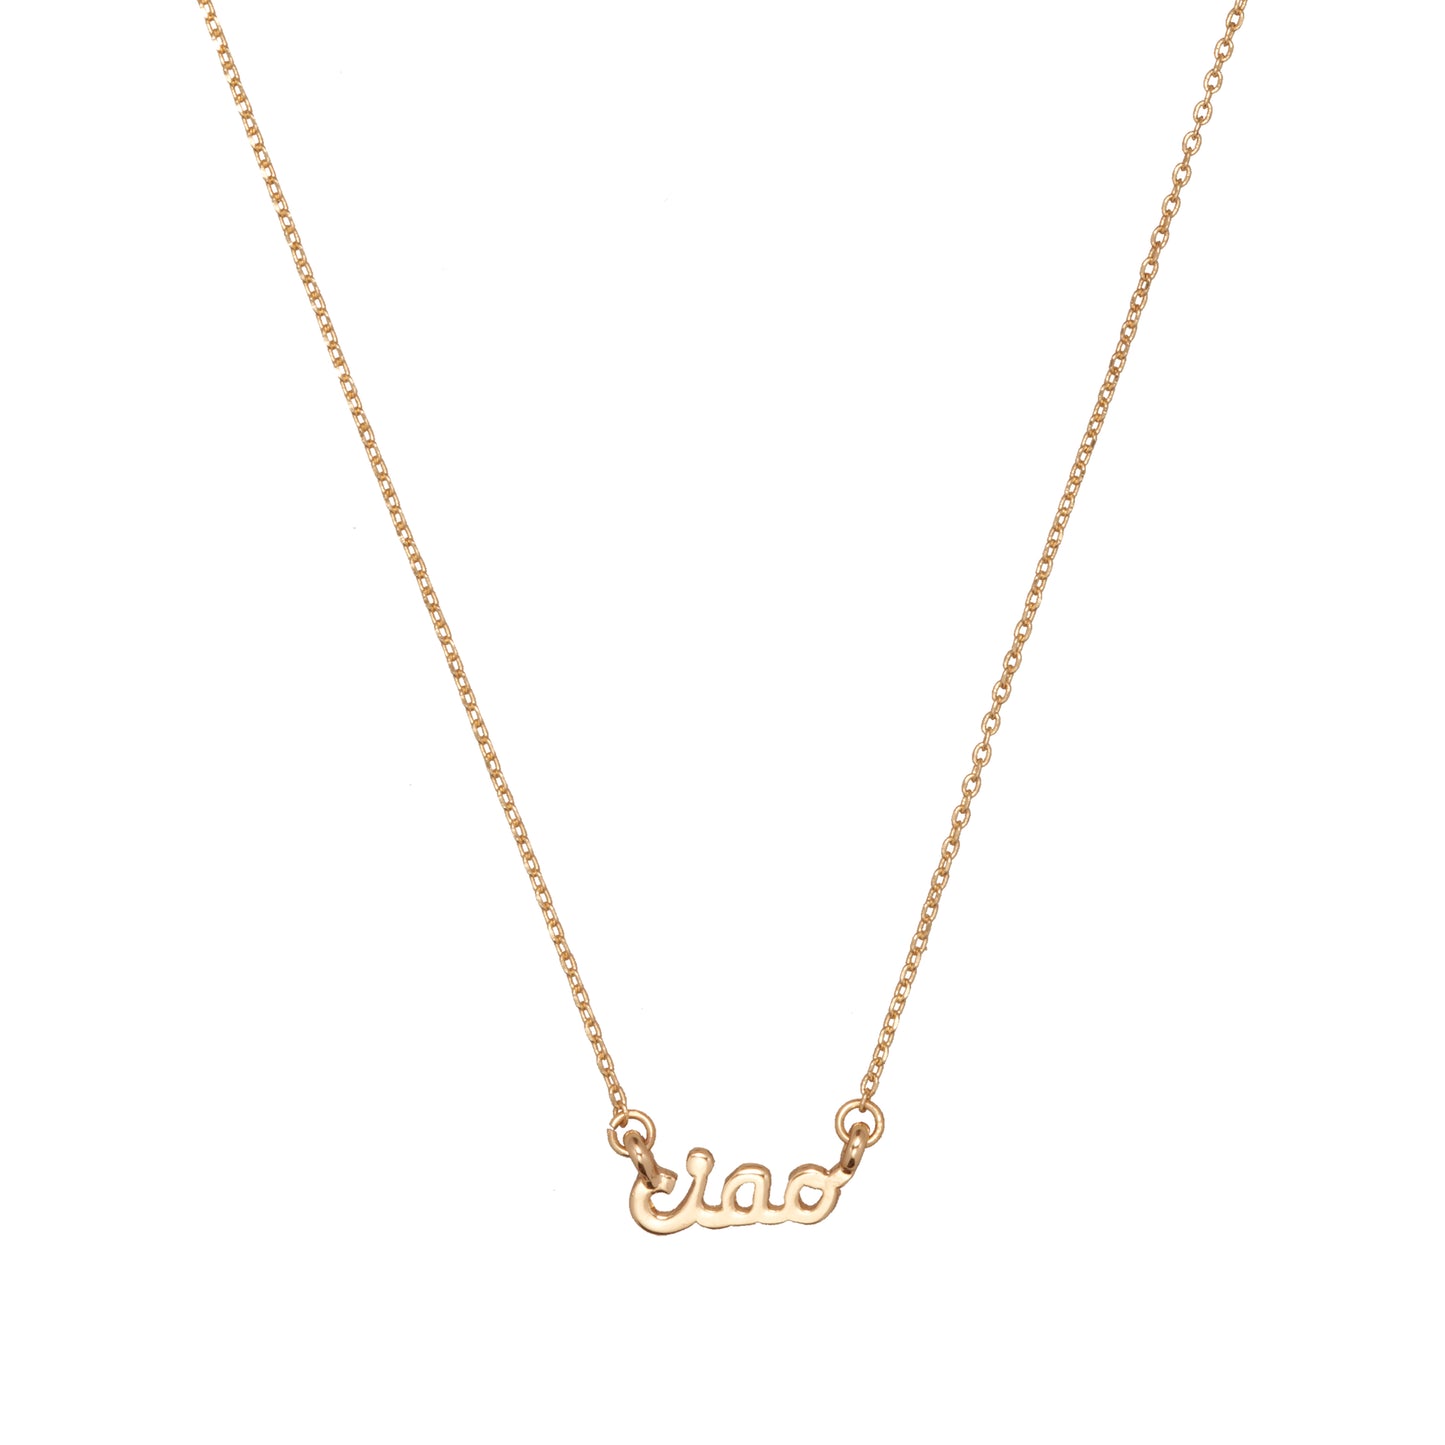 "Ciao" Delicate Word Necklace